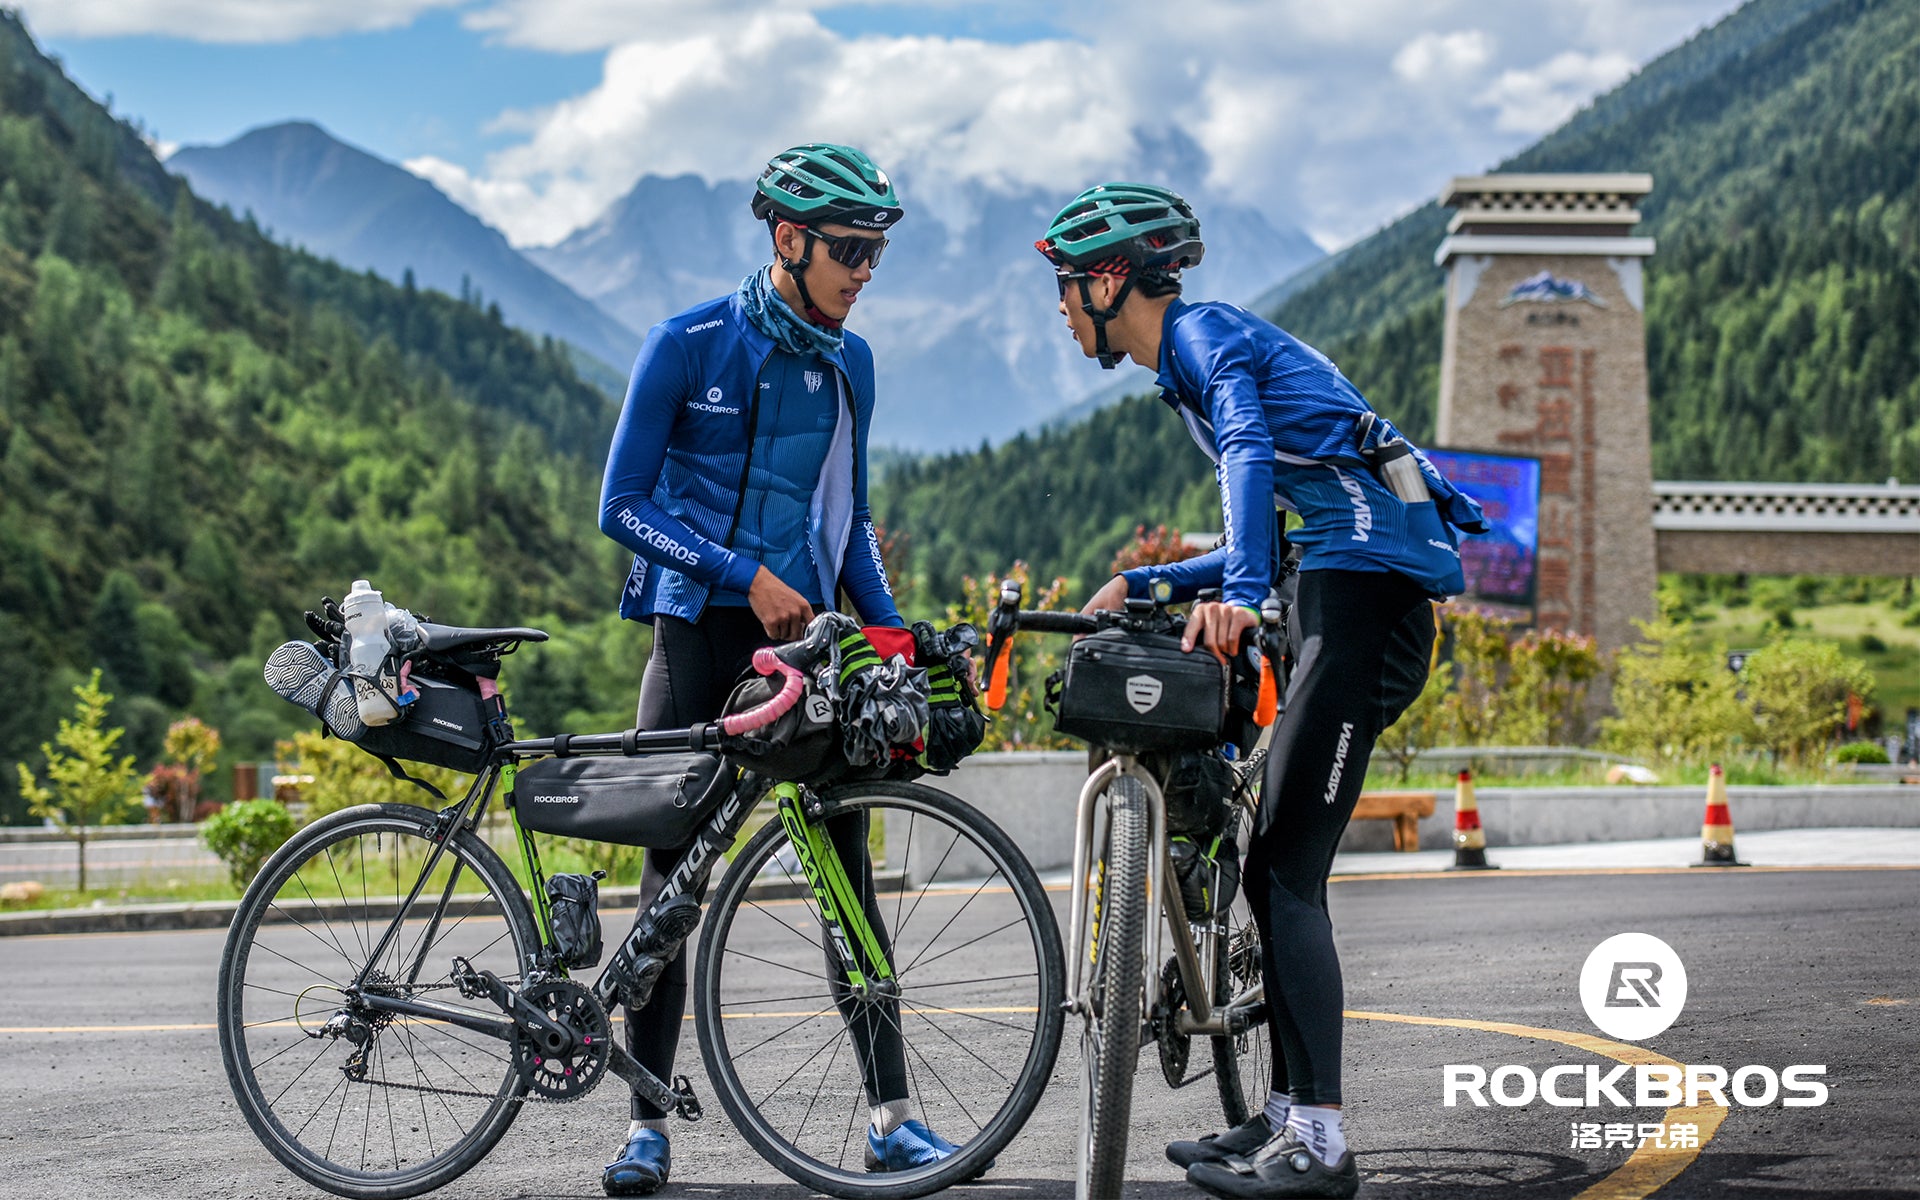 Rockbros: The Ultimate Cycling Experience